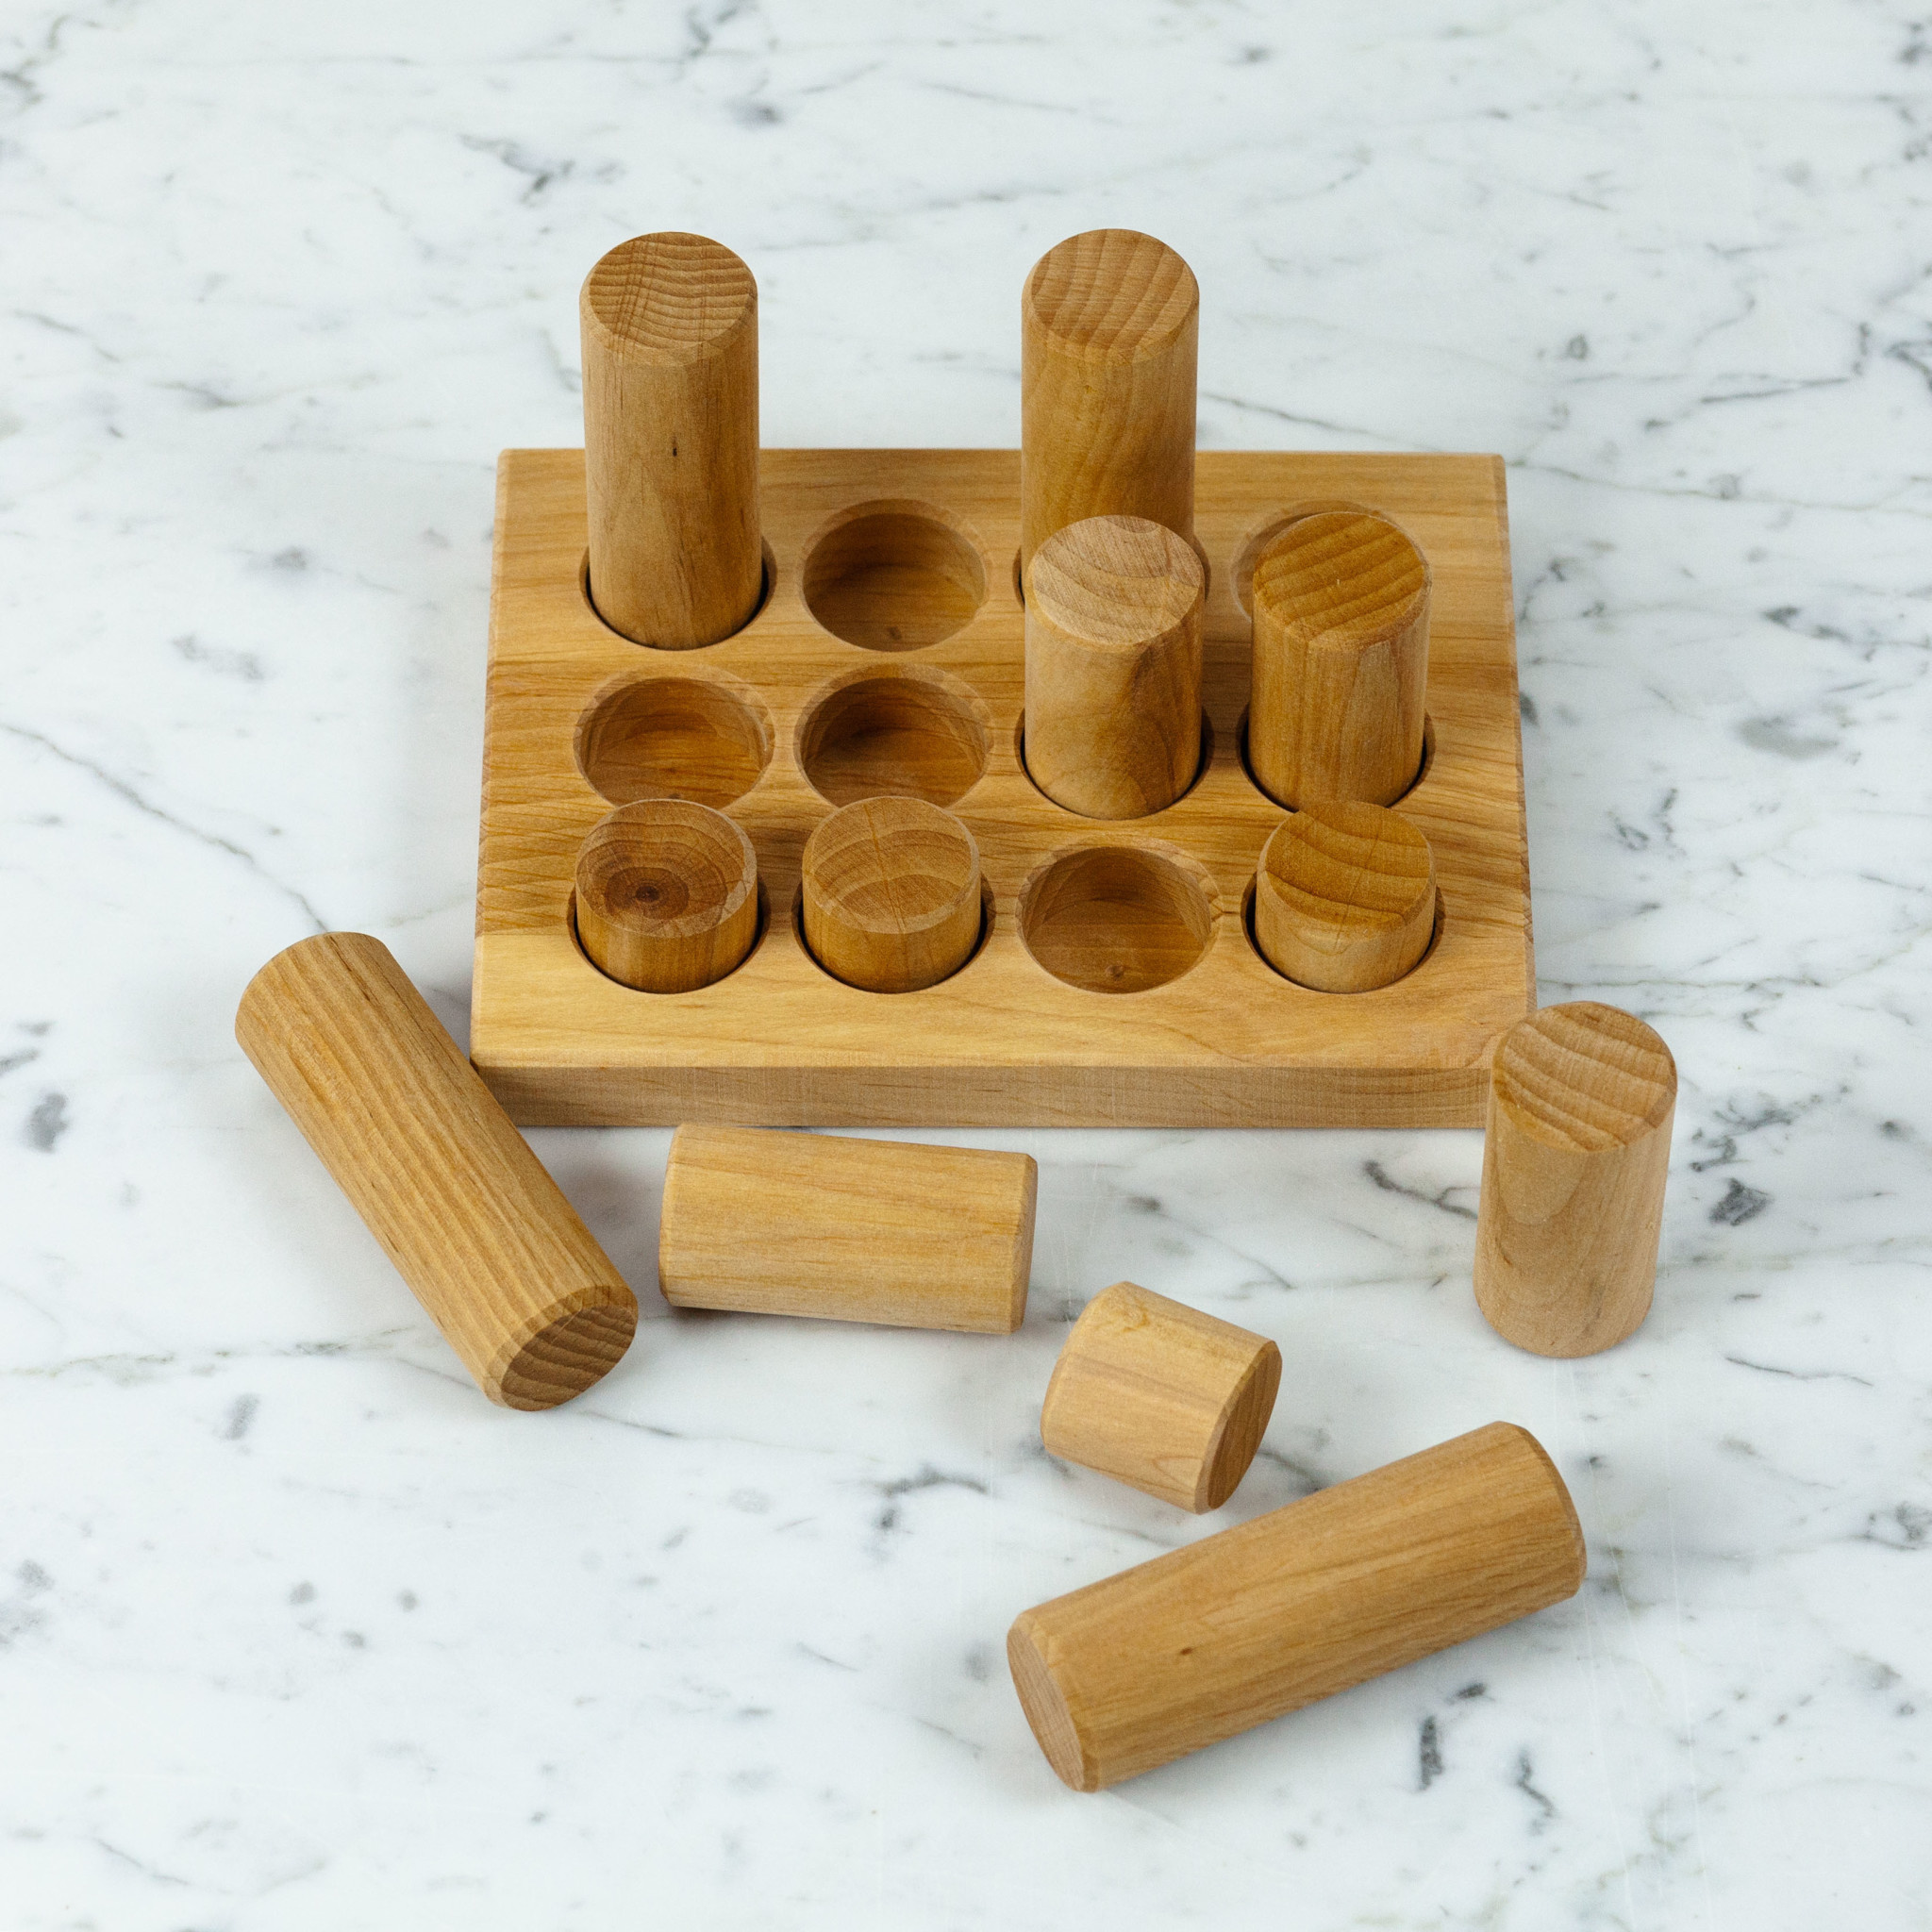 Grimm's Toys Wooden Rolling + Stacking Game Small - Natural